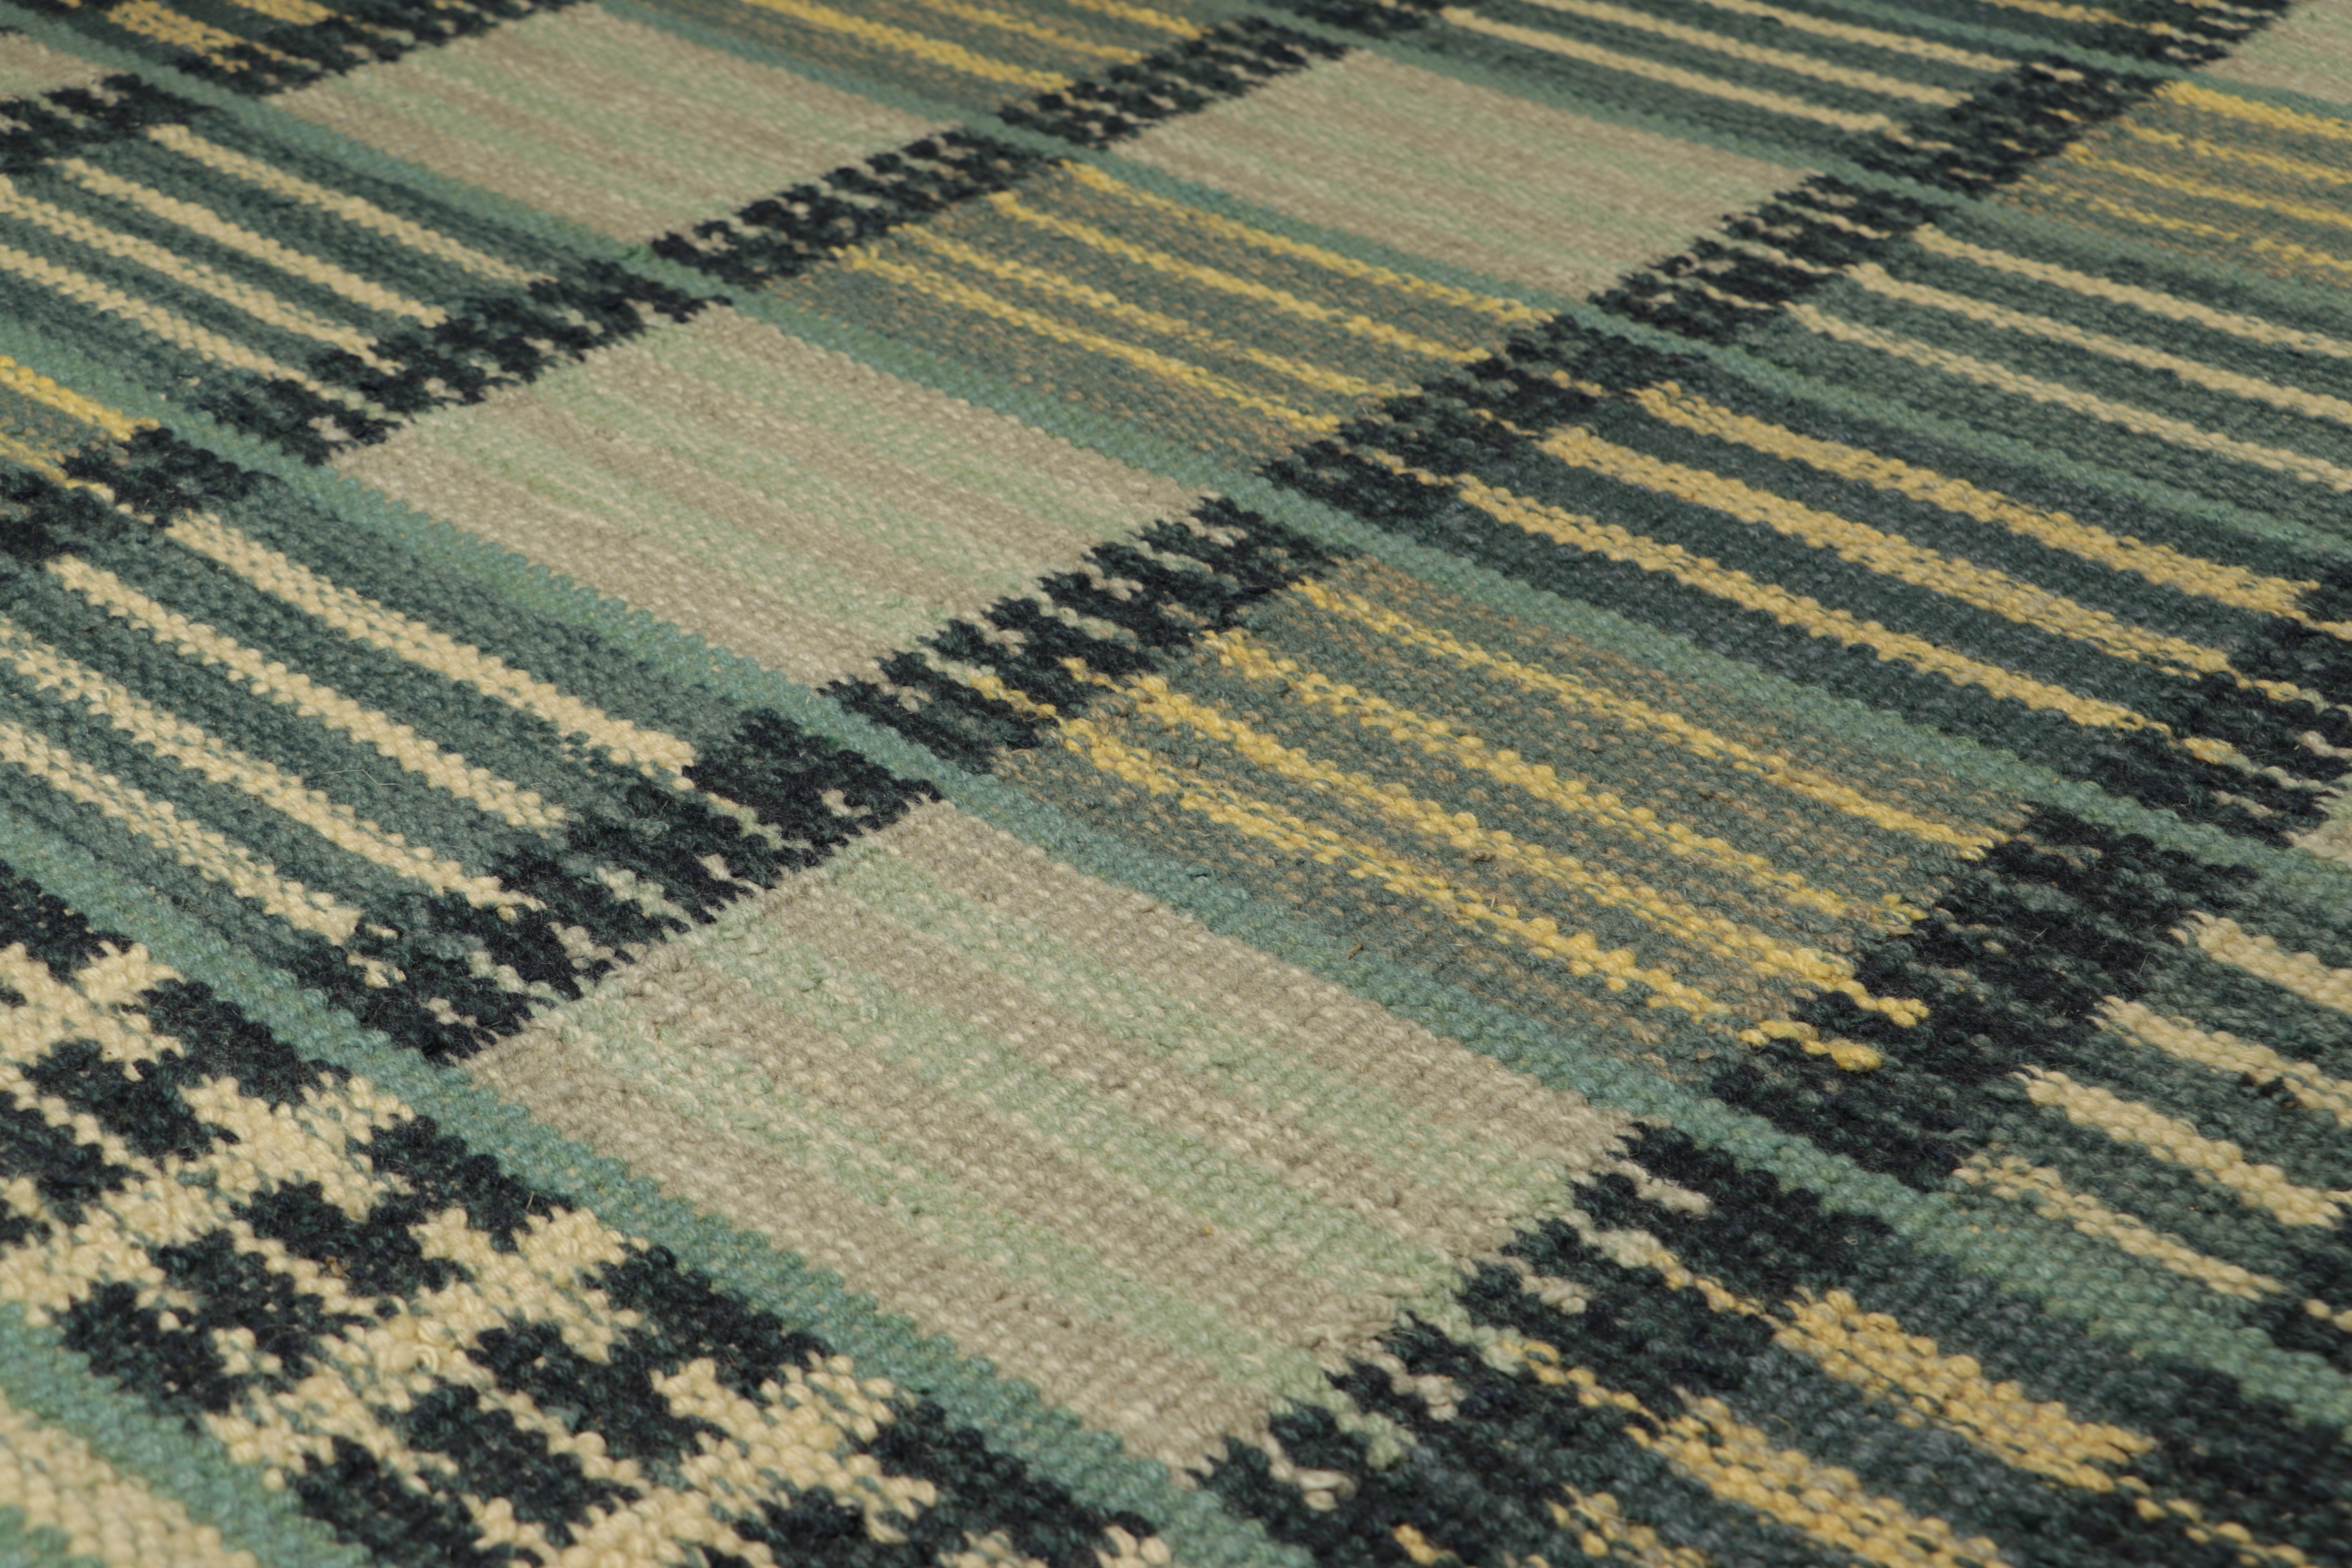 From an exciting new collection of gift-size pieces, this 4x6 Swedish-style accent rug is a bold new addition to the Scandinavian Collection by Rug & Kilim. Handwoven in a wool flatweave with undyed natural yarns as well, its design is inspired by